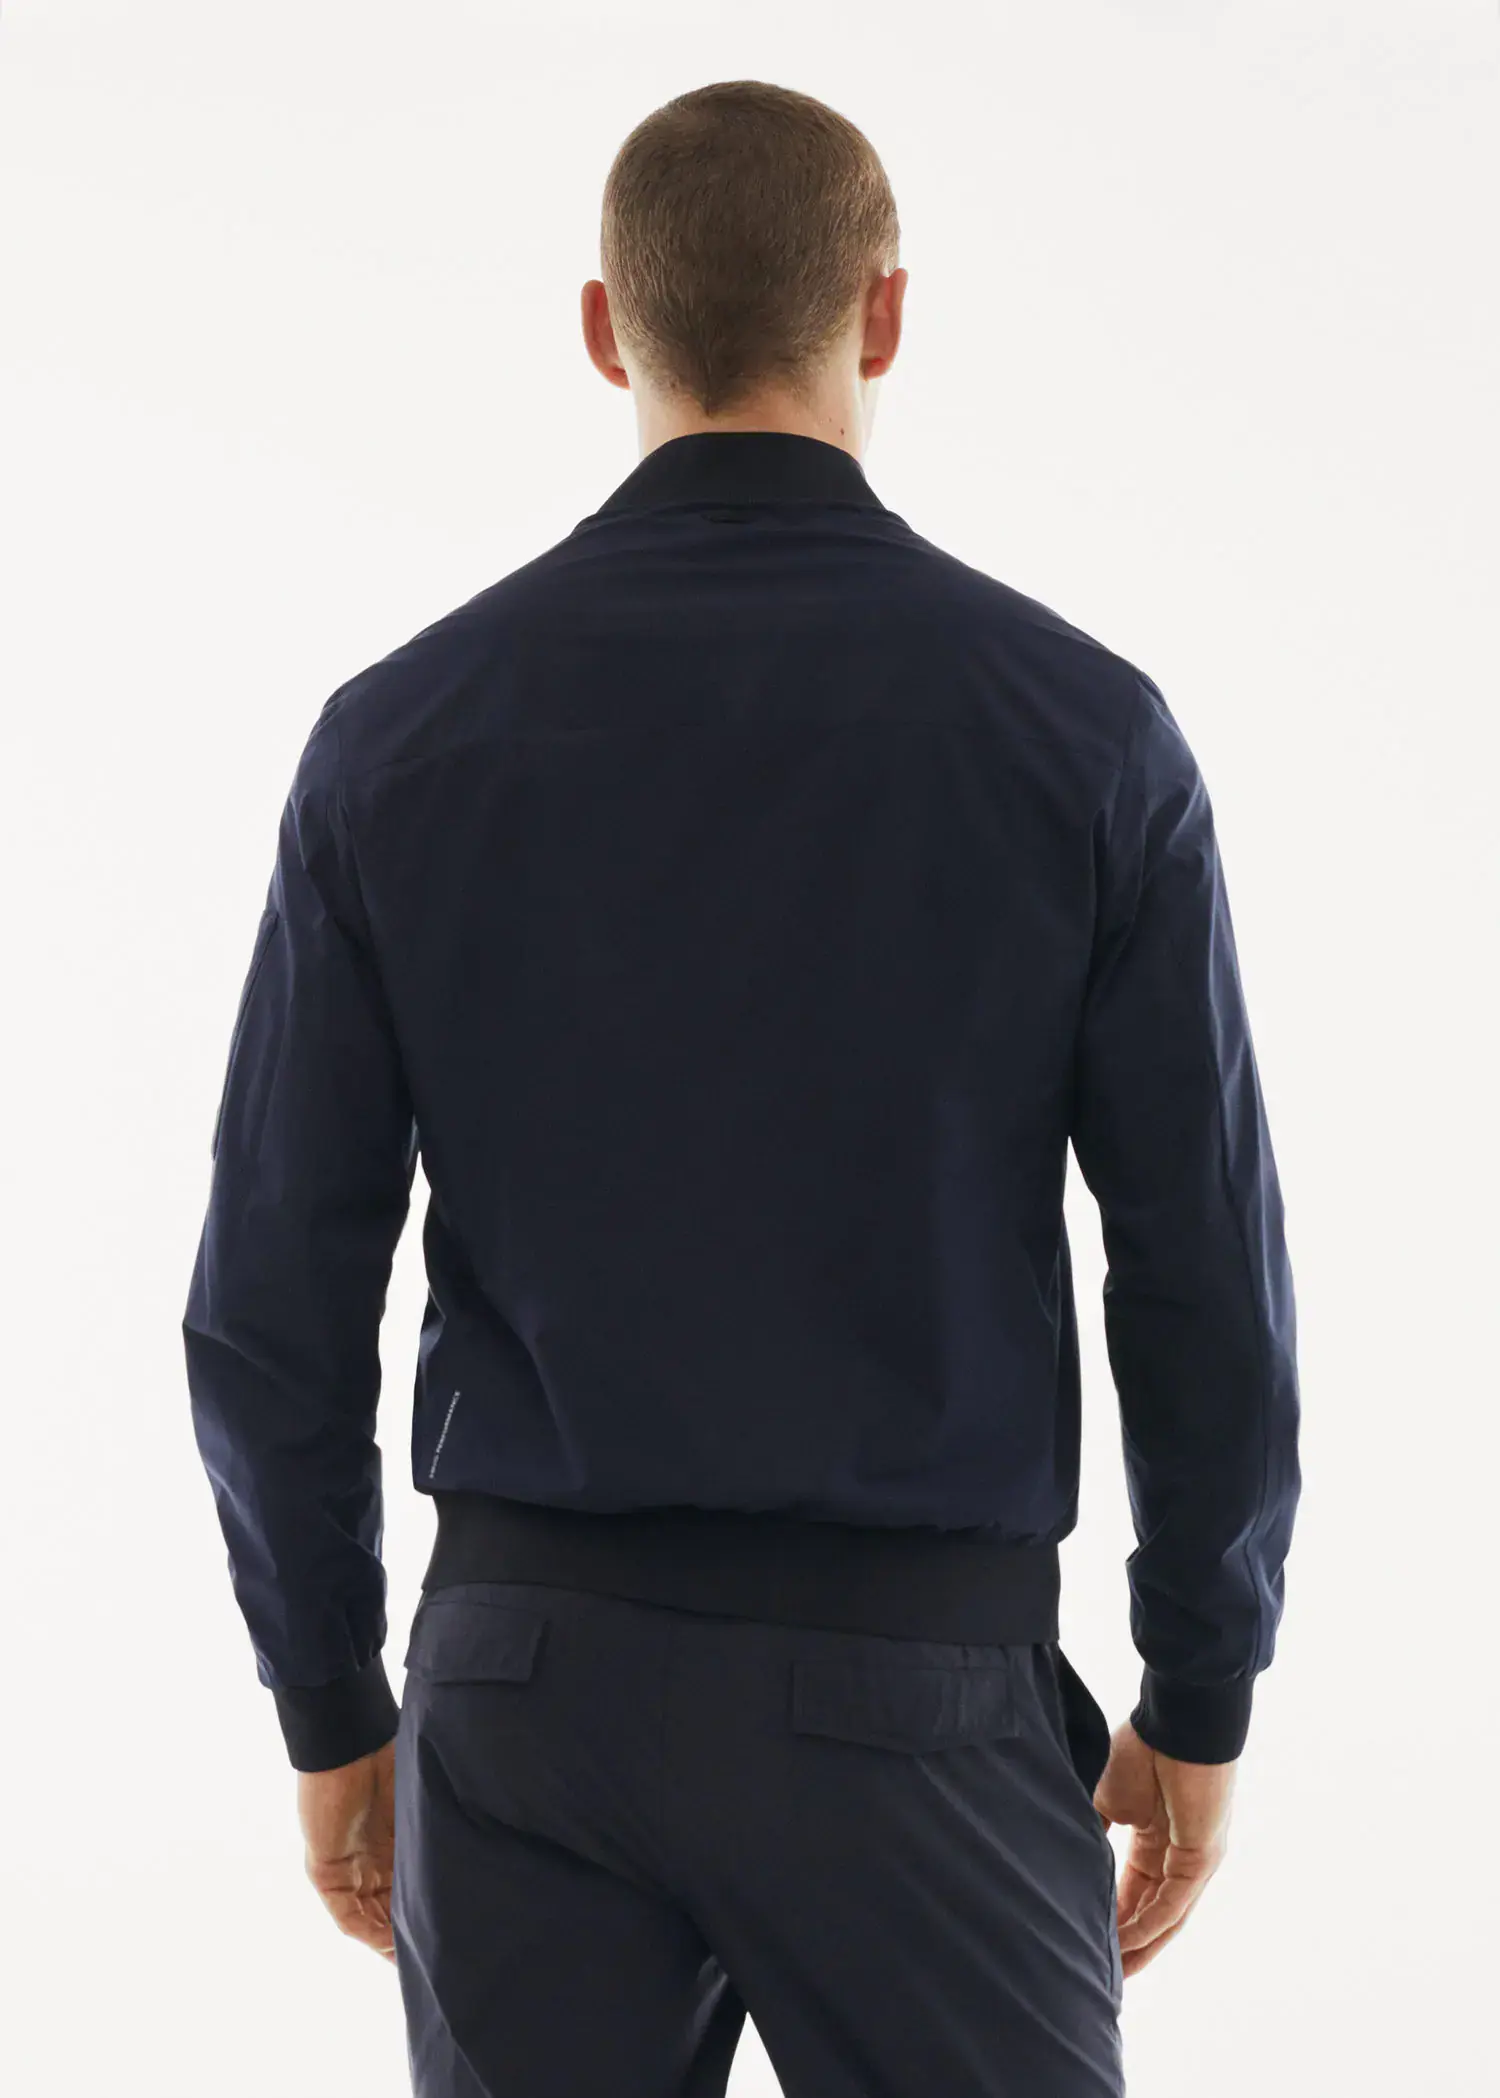 Mango Bomber jacket made of water-repellent technical fabric. a man wearing a black jacket standing in front of a white wall. 